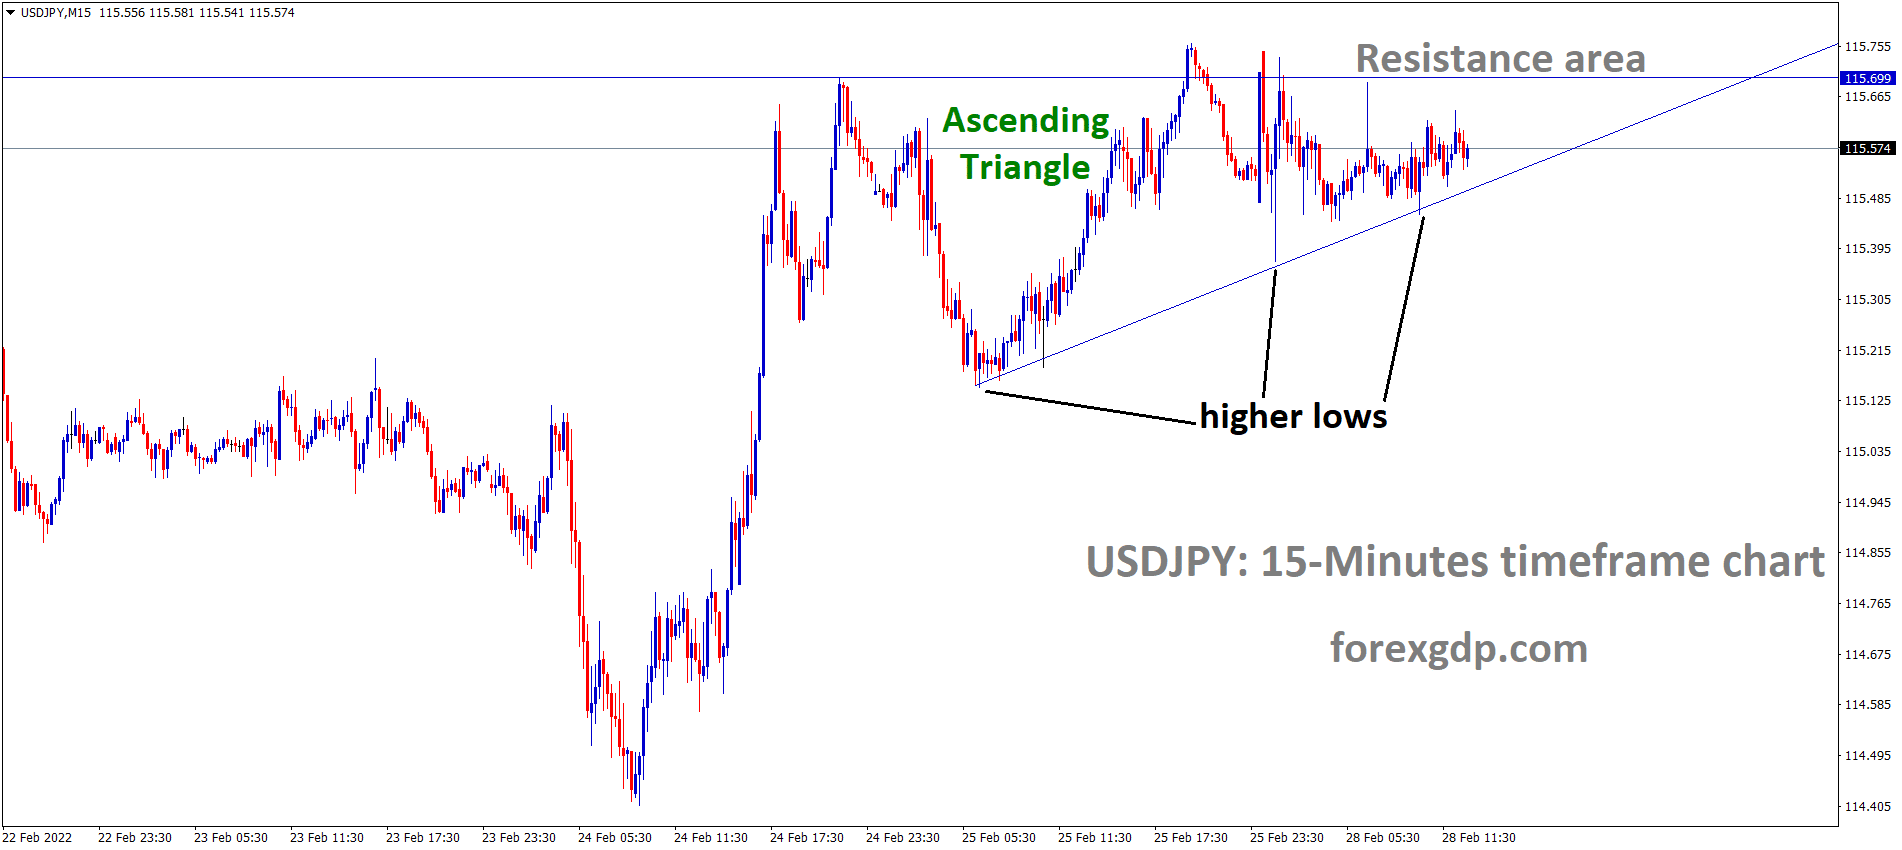 USDJPY is moving in an ascending triangle pattern and the market has rebounded from the higher low area of the pattern.